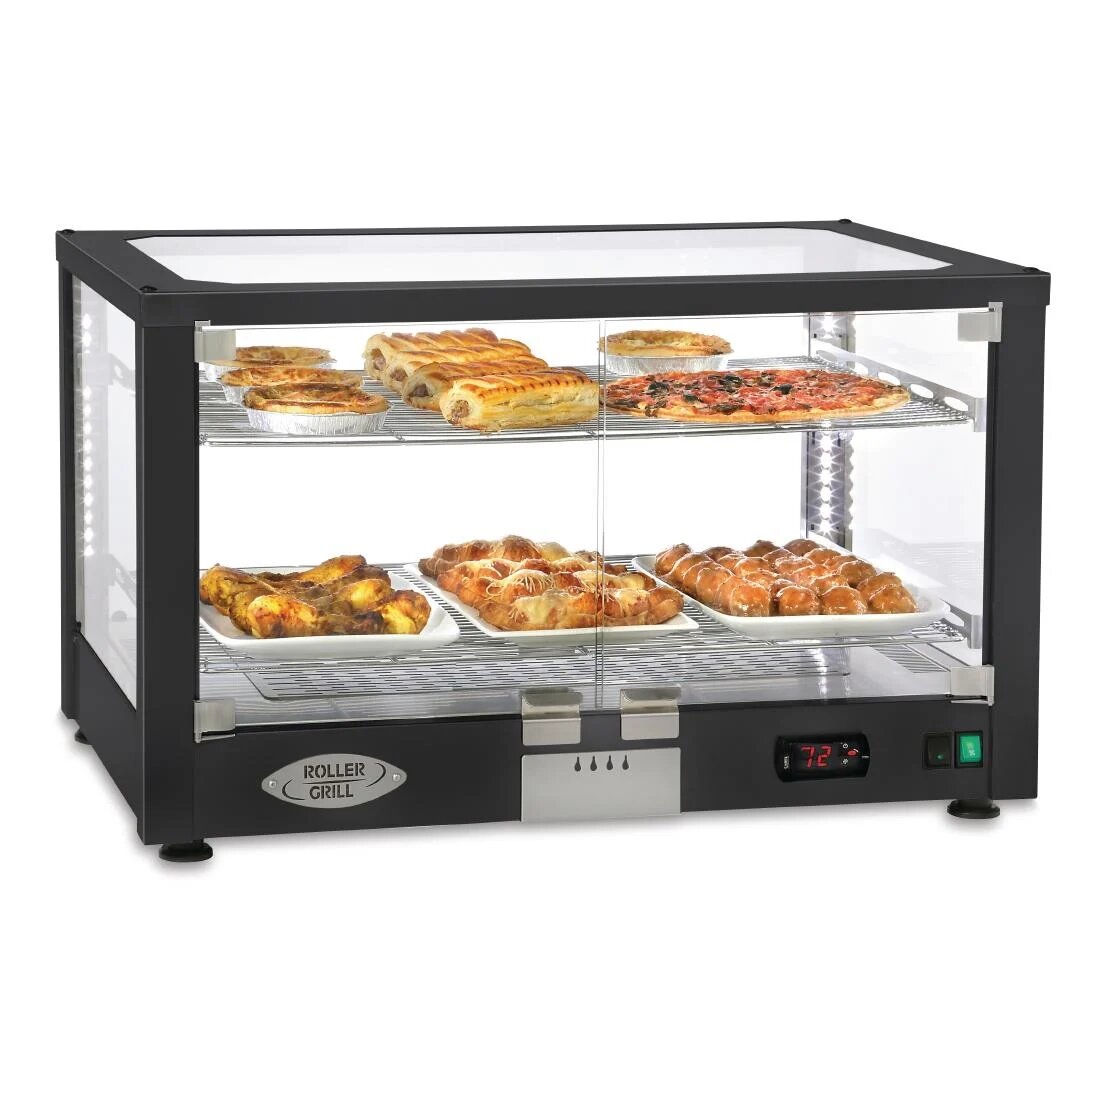 Roller Grill WD780 SN Two Shelf Black Finish Counter Top Heated Display